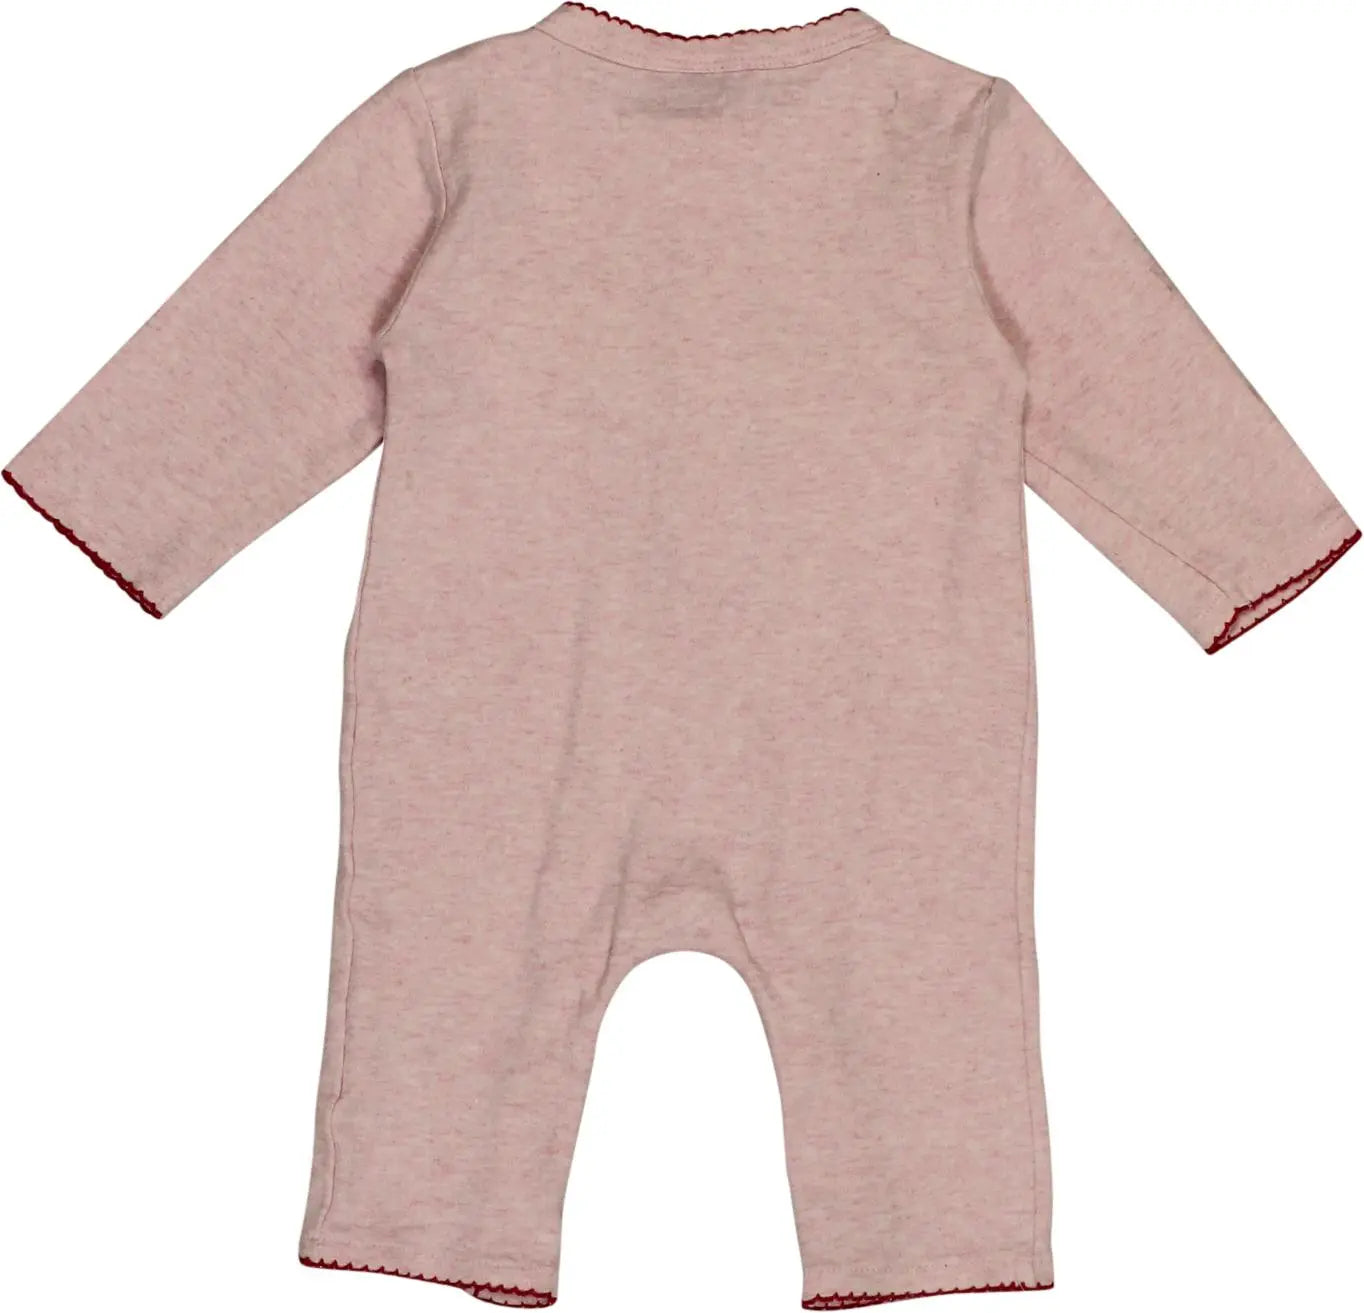 Lief! - Sleepsuit- ThriftTale.com - Vintage and second handclothing